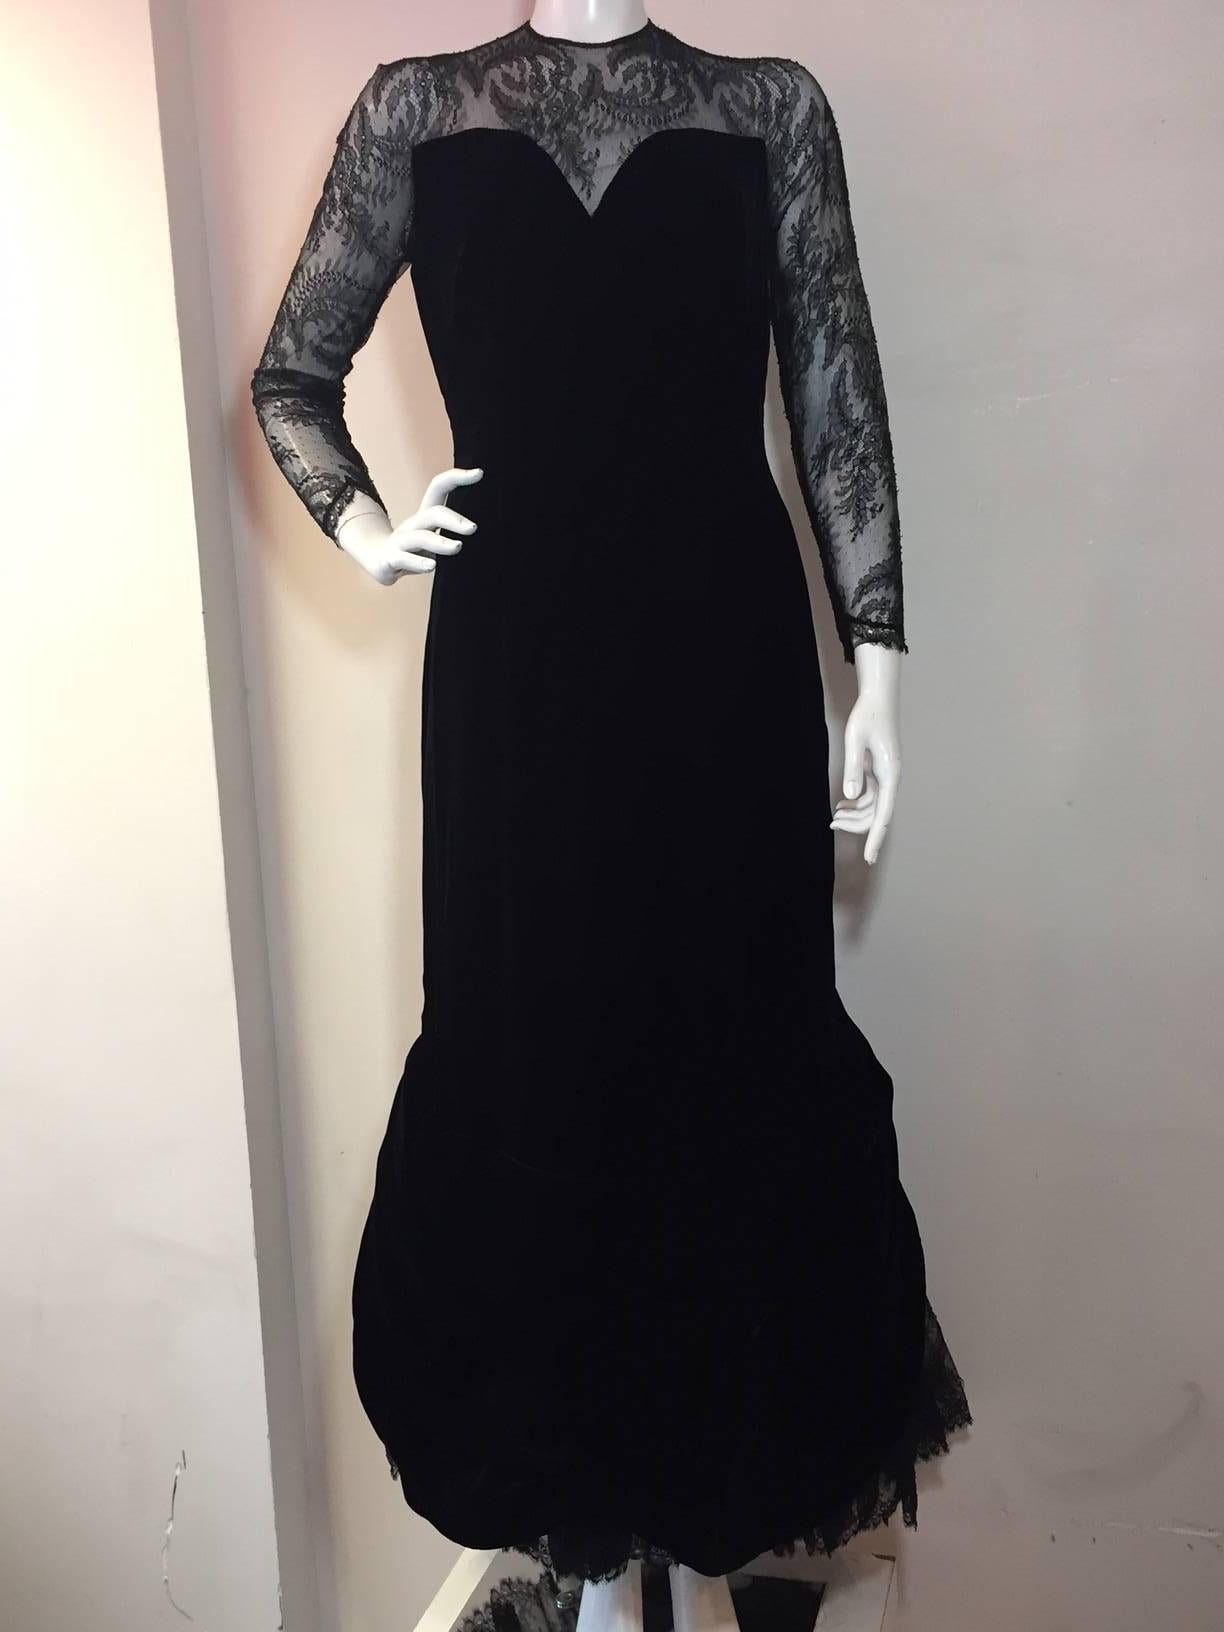 A beautiful 1980s Arnold Scaasi black silk velvet gown with Chantilly lace sleeves, décolletage, and flared inset fishtail train.  The train is voluminous with 8 layers of tulle and horsehair underneath for movement. Two large silk flowers adorns